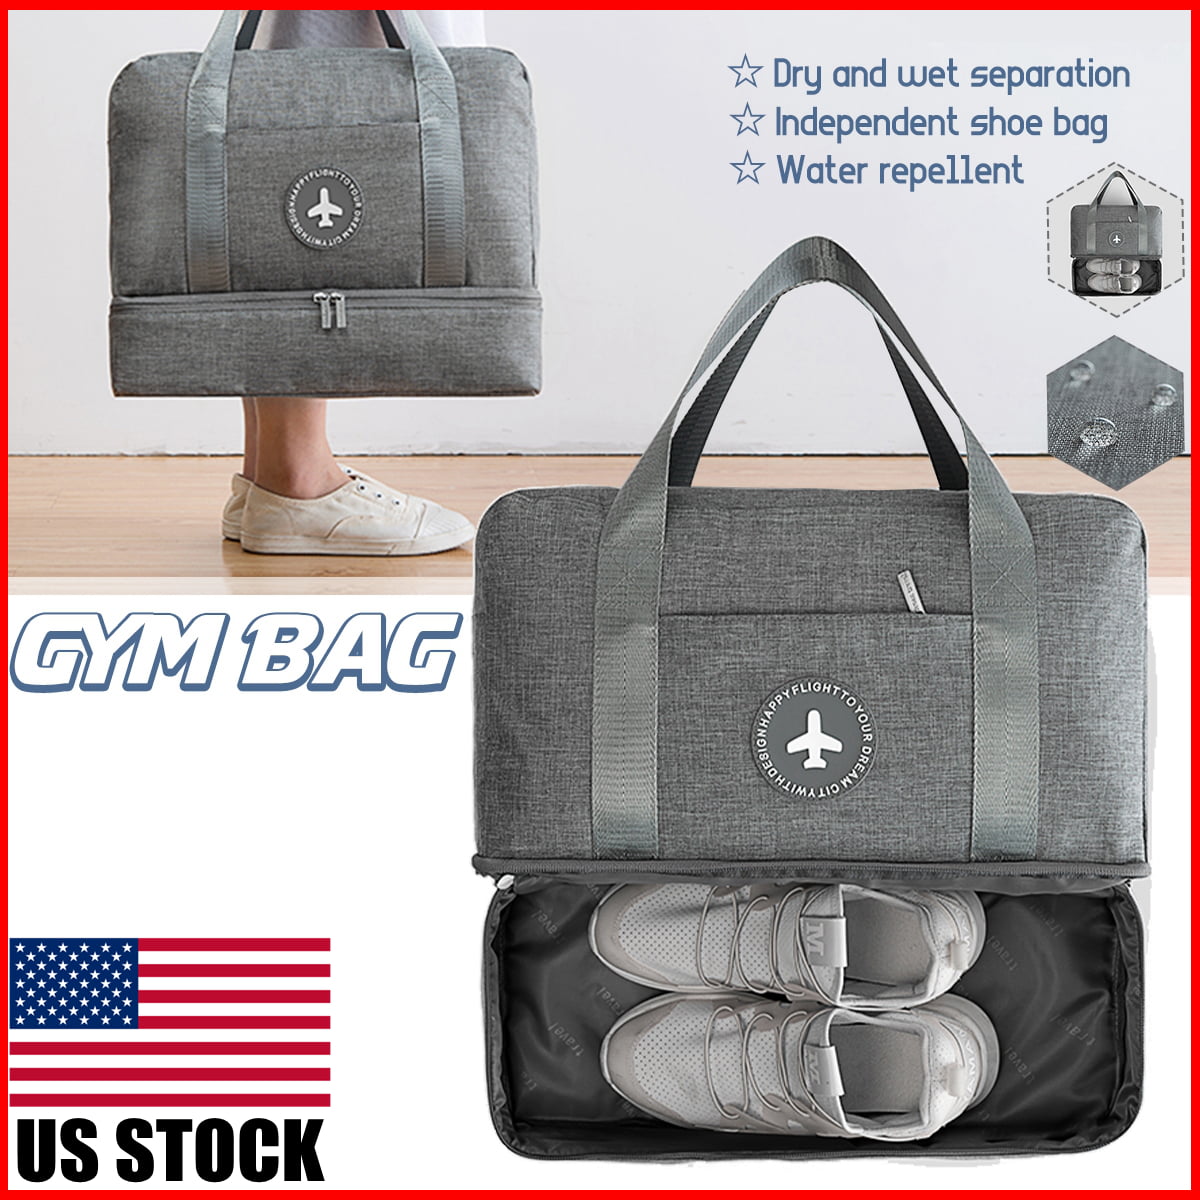 Bag With Compartment For Shoes Travel Bag Dry And Wet Separation Large Capacity Gray 